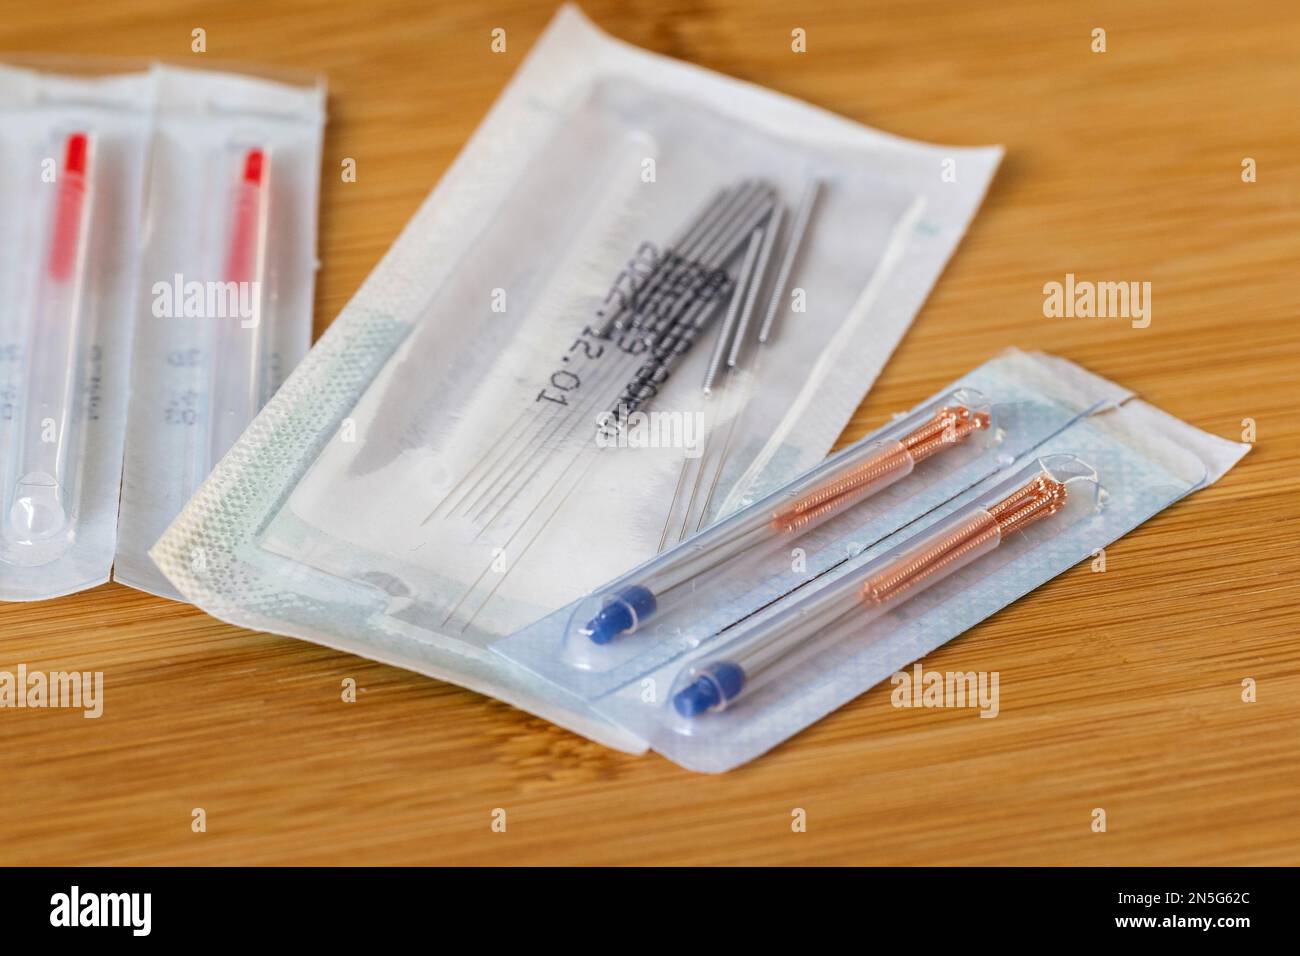 A close up portrait of multiple packages of different acupuncture needles, ready to use on someone with health issues. There are also plastic tubes in Stock Photo